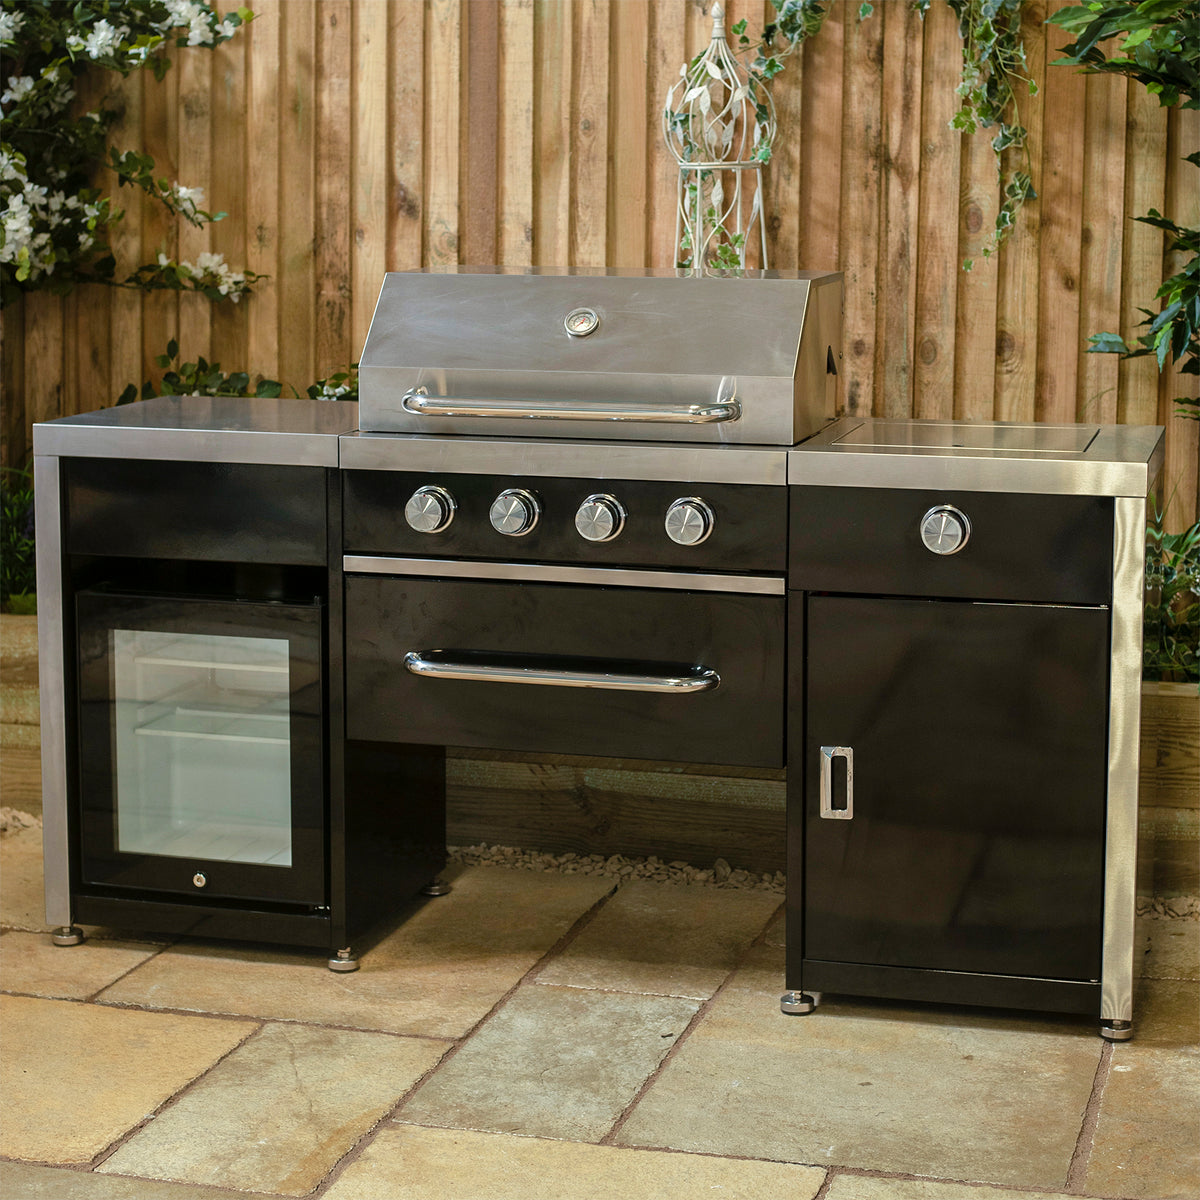 Draco Grills Black 4 Burner Gas Barbecue Outdoor Kitchen Island with Fridge and Side Burner